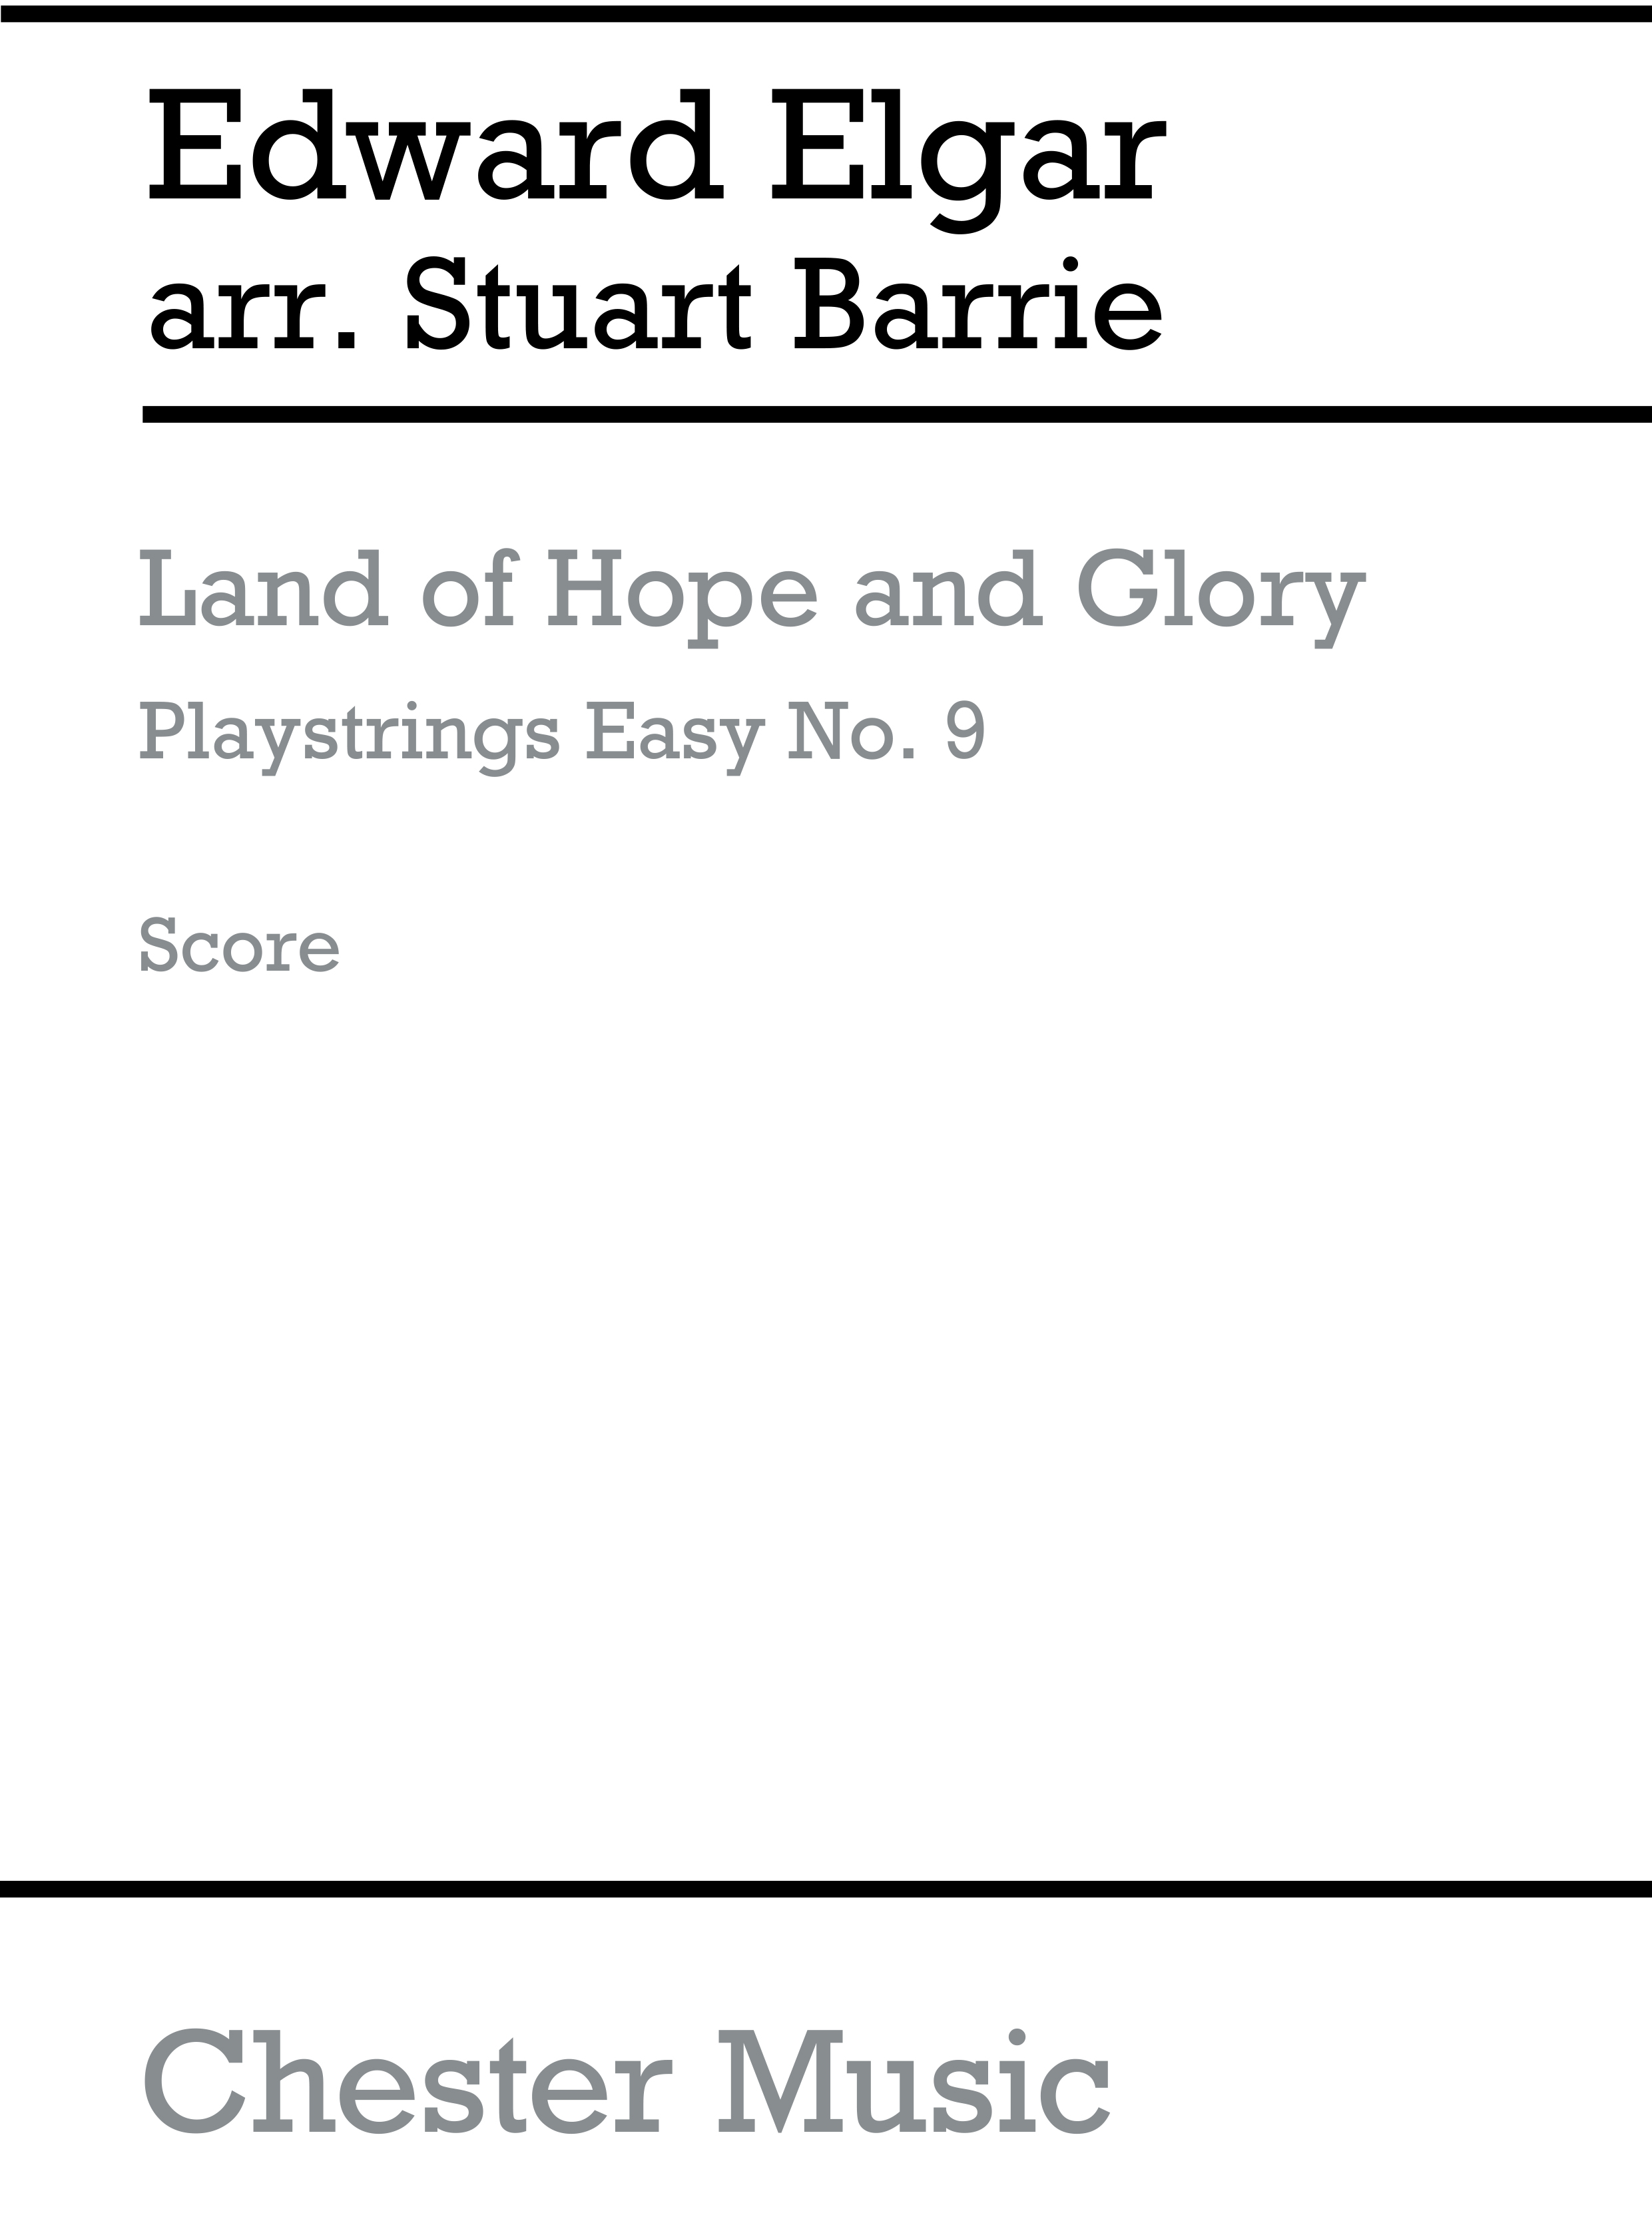 Edward Elgar: Playstrings Easy No. 9: Land Of Hope And Glory: Orchestra: Score